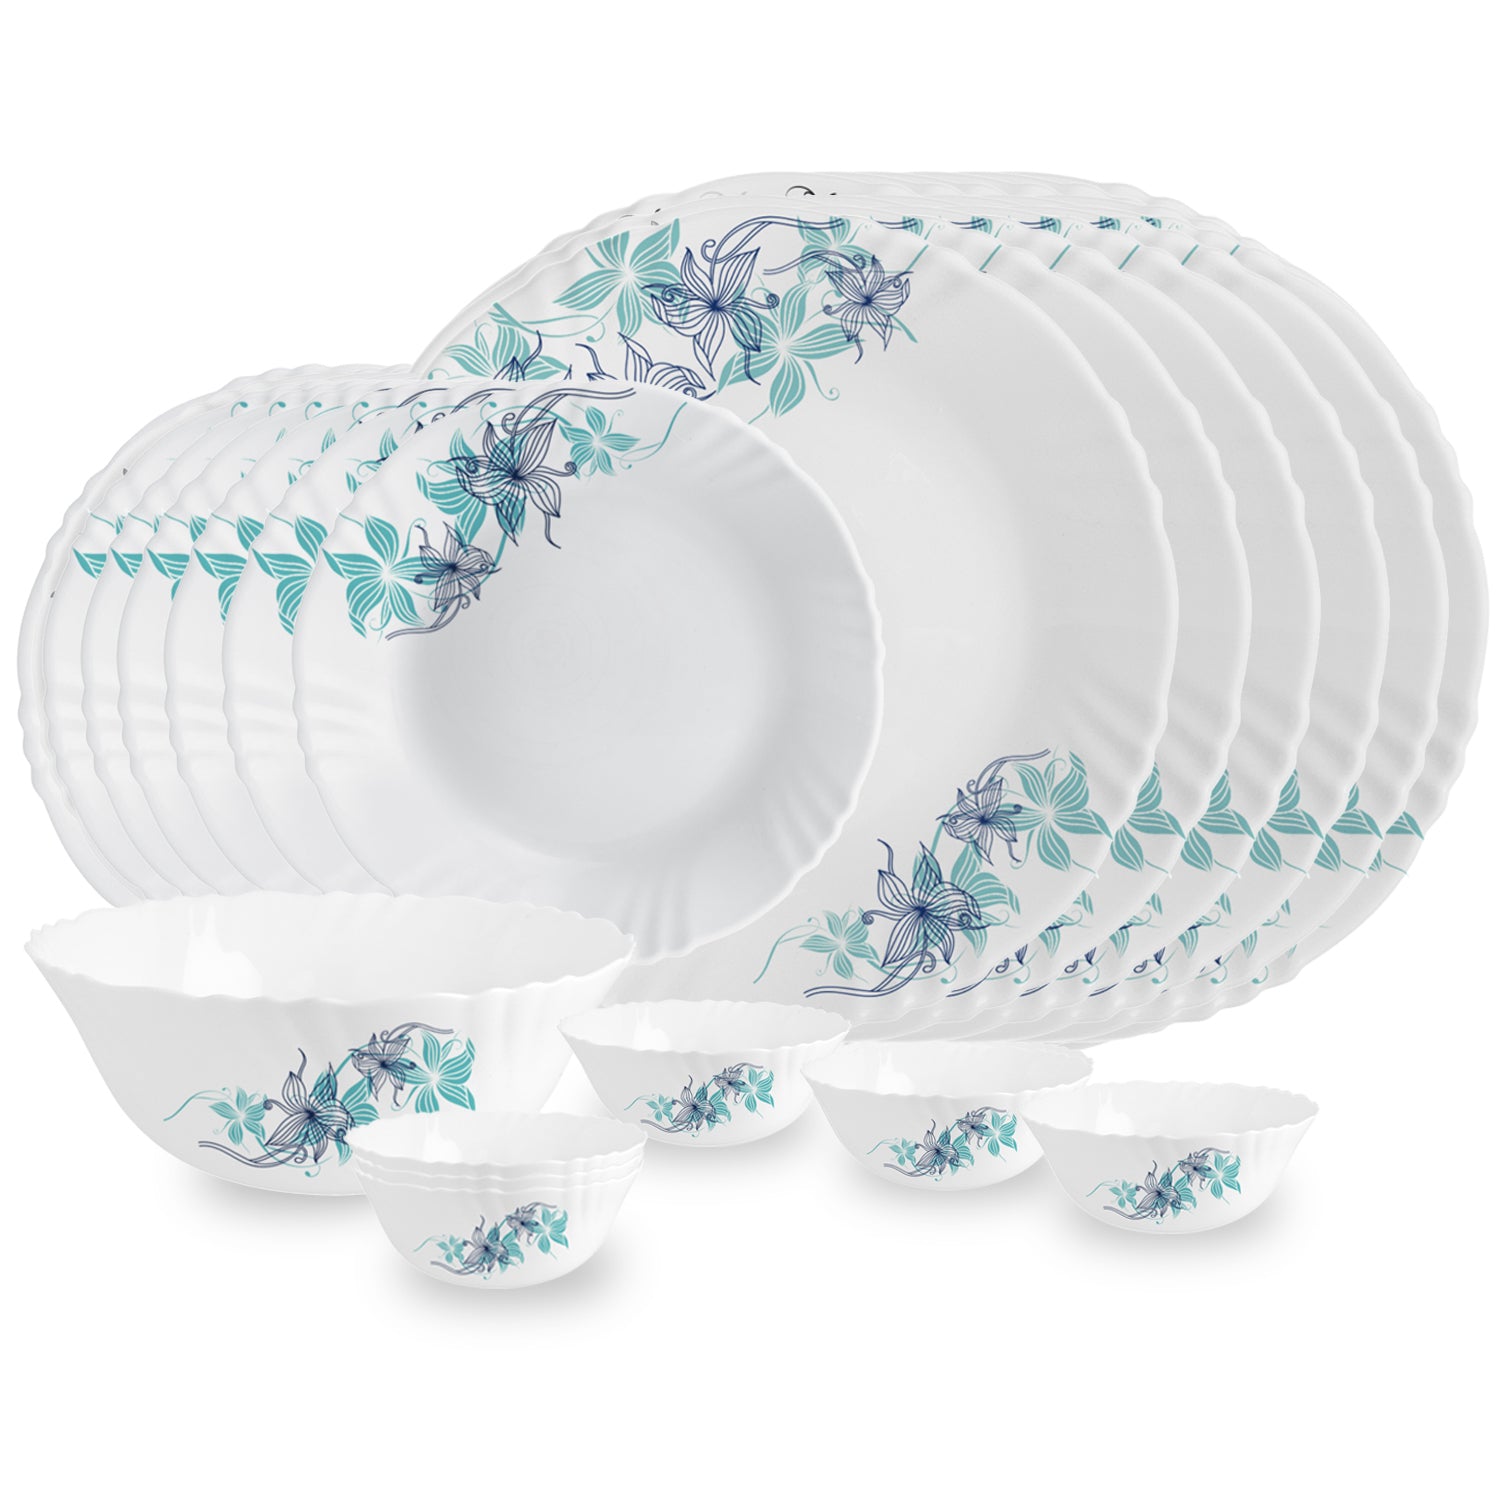 Imperial Series 19 Pieces Opalware Dinner Set for Family of 6 Blue Buster